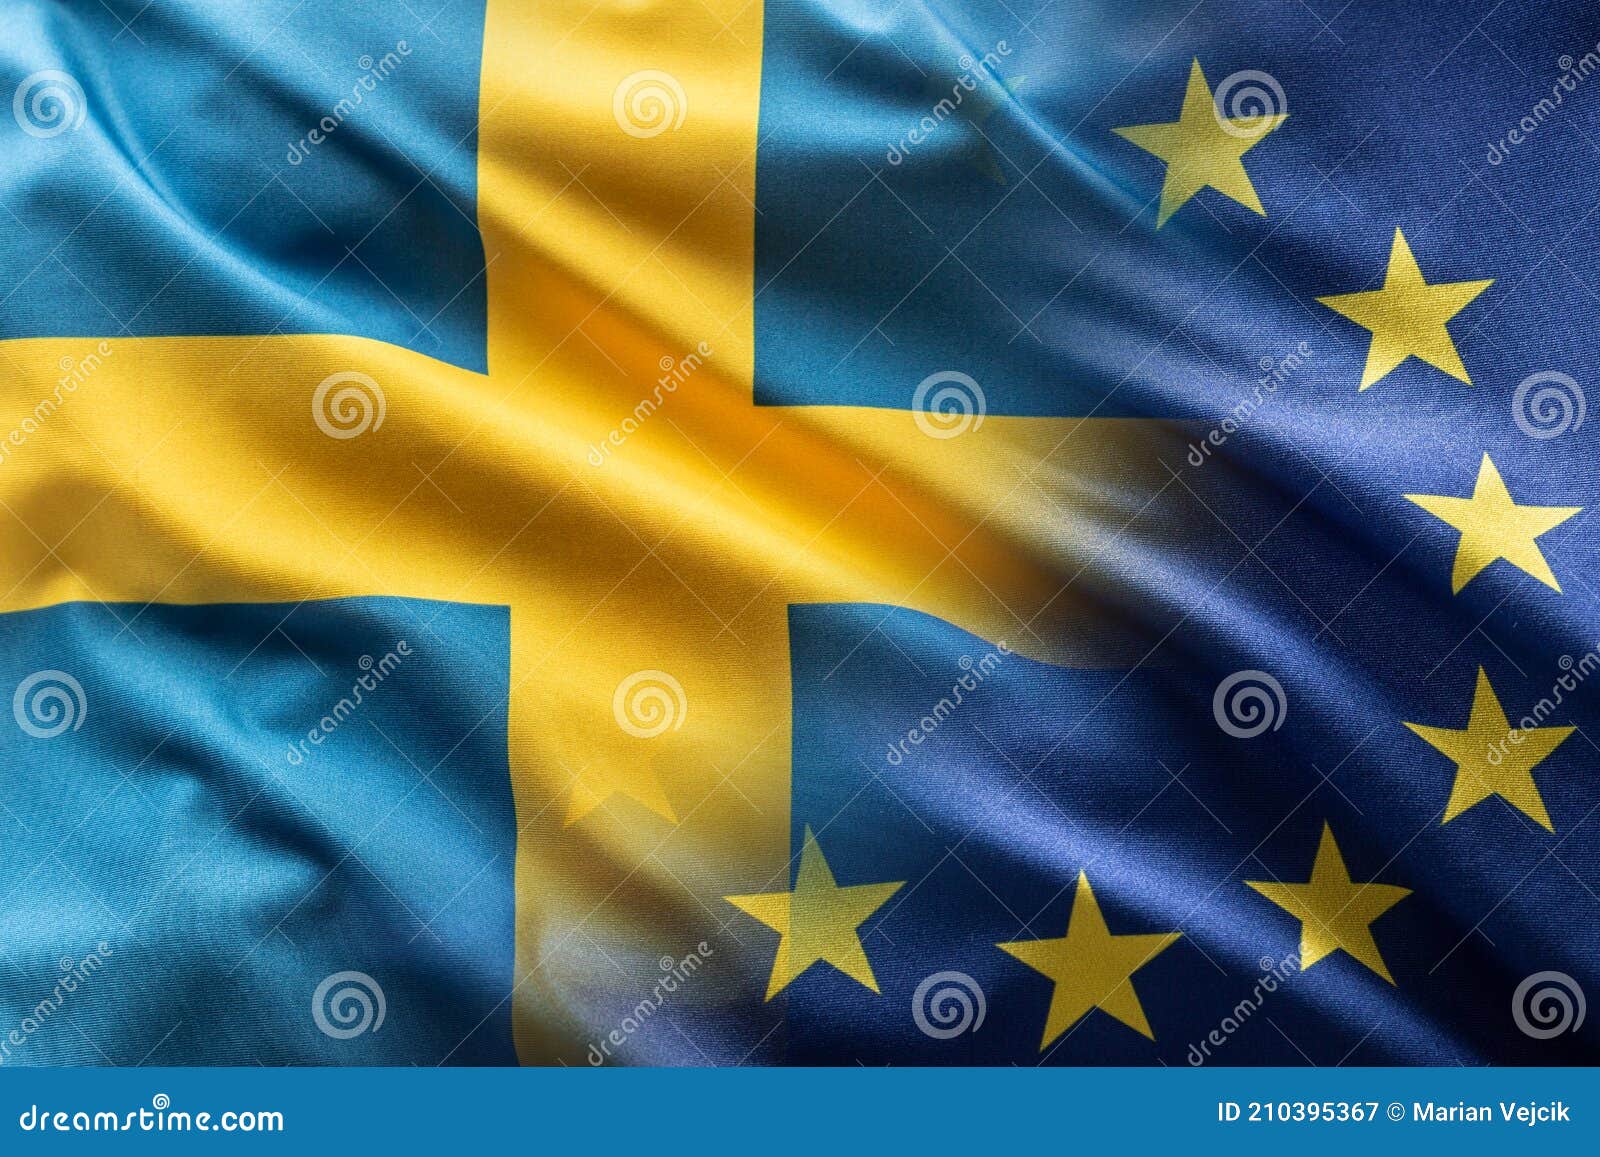 flags of sweden and eu blowing in the wind